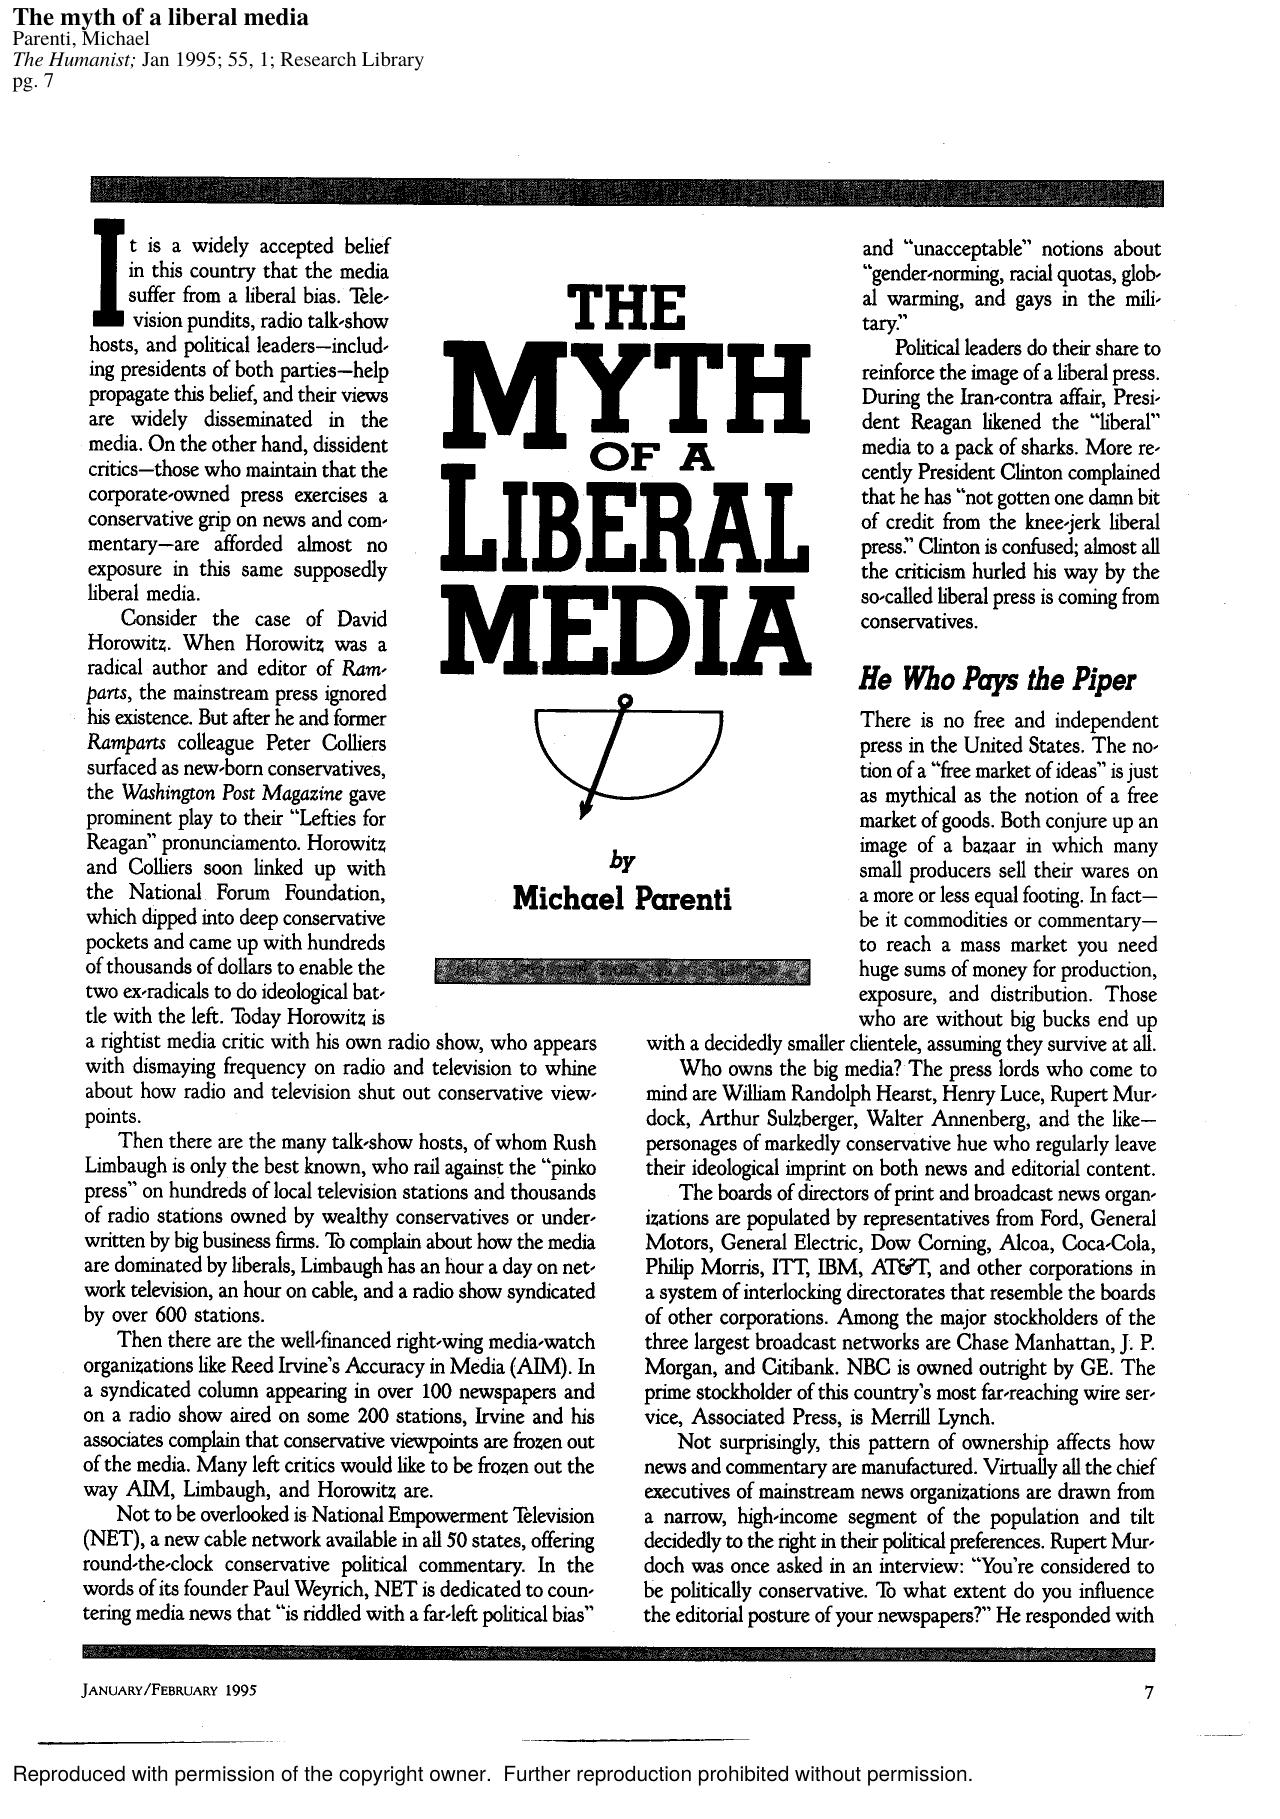 The myth of a liberal media by Unknown